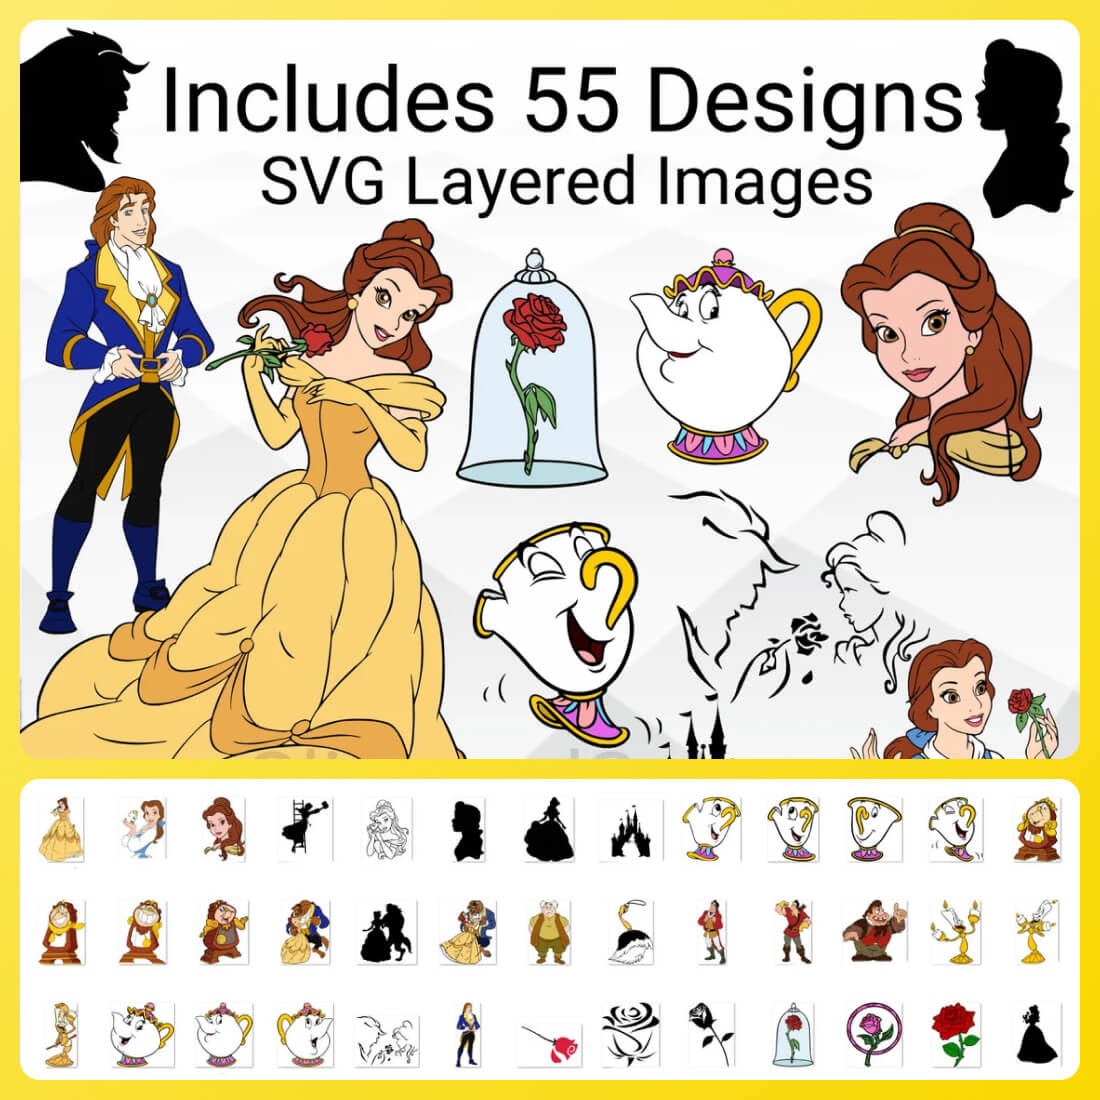 Includes 55 Designs, SVG Layered Images.